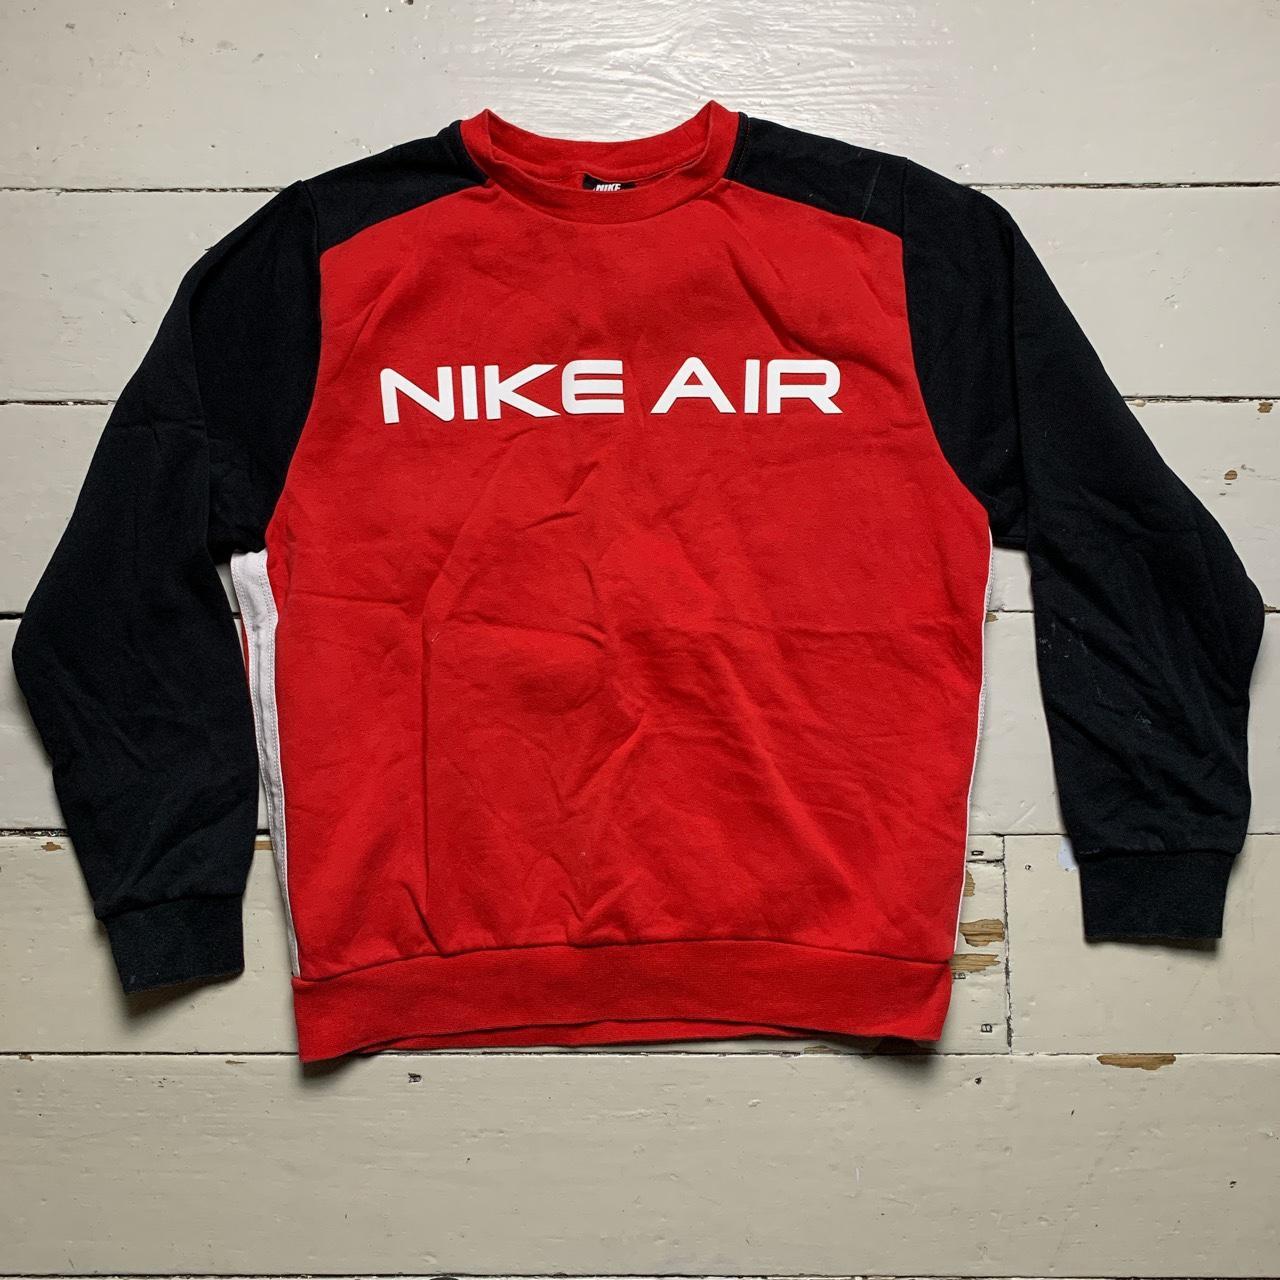 Nike Air Red Black and White Jumper